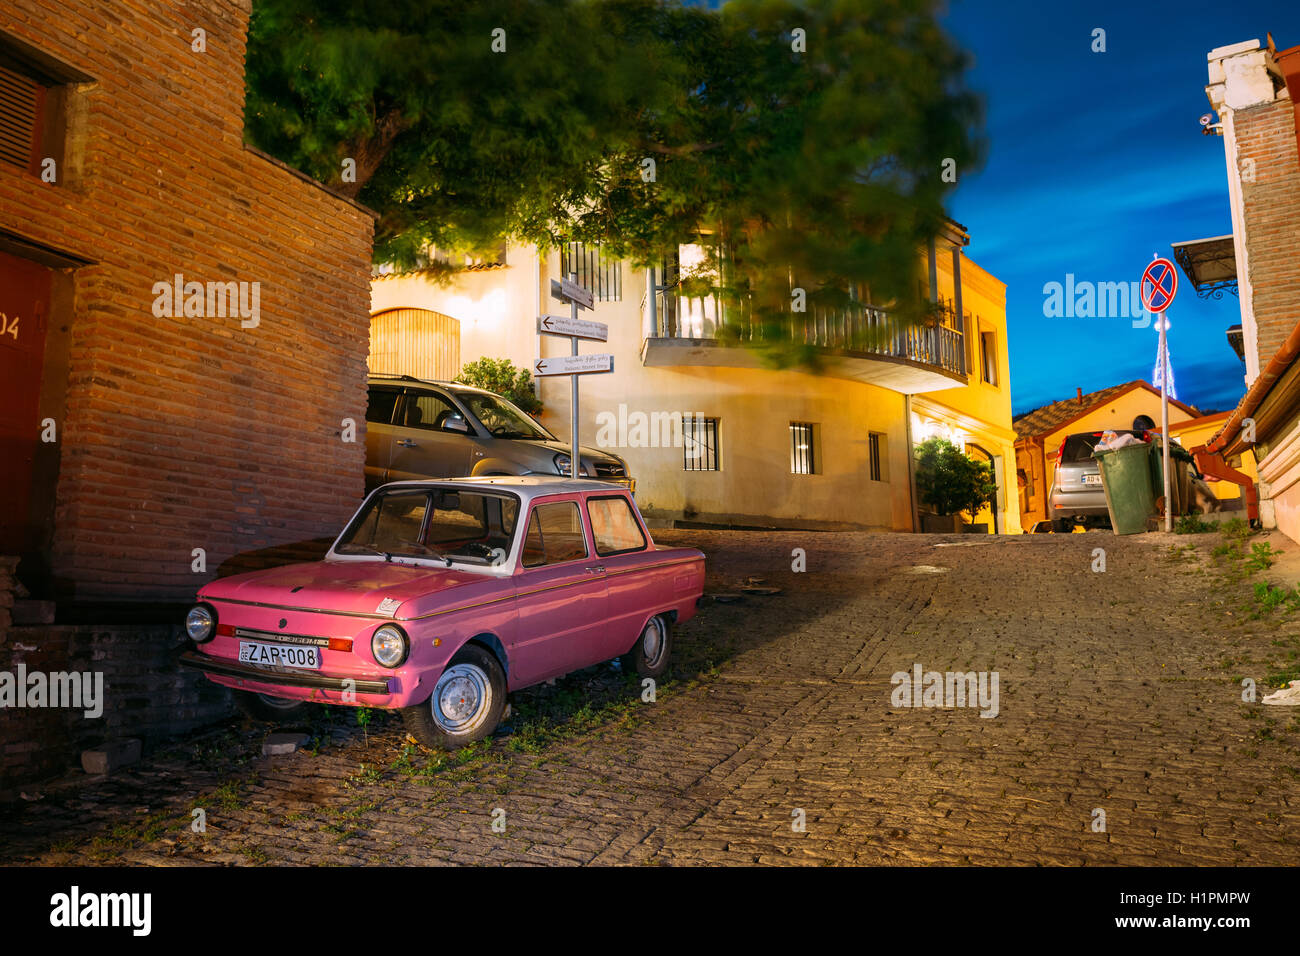 Tbilisi, Georgia - May 19, 2016: The Parked Rarity Tuning Pink Minicar ZAZ-968M Zaporozhets On The Street Paved By The Cobblesto Stock Photo